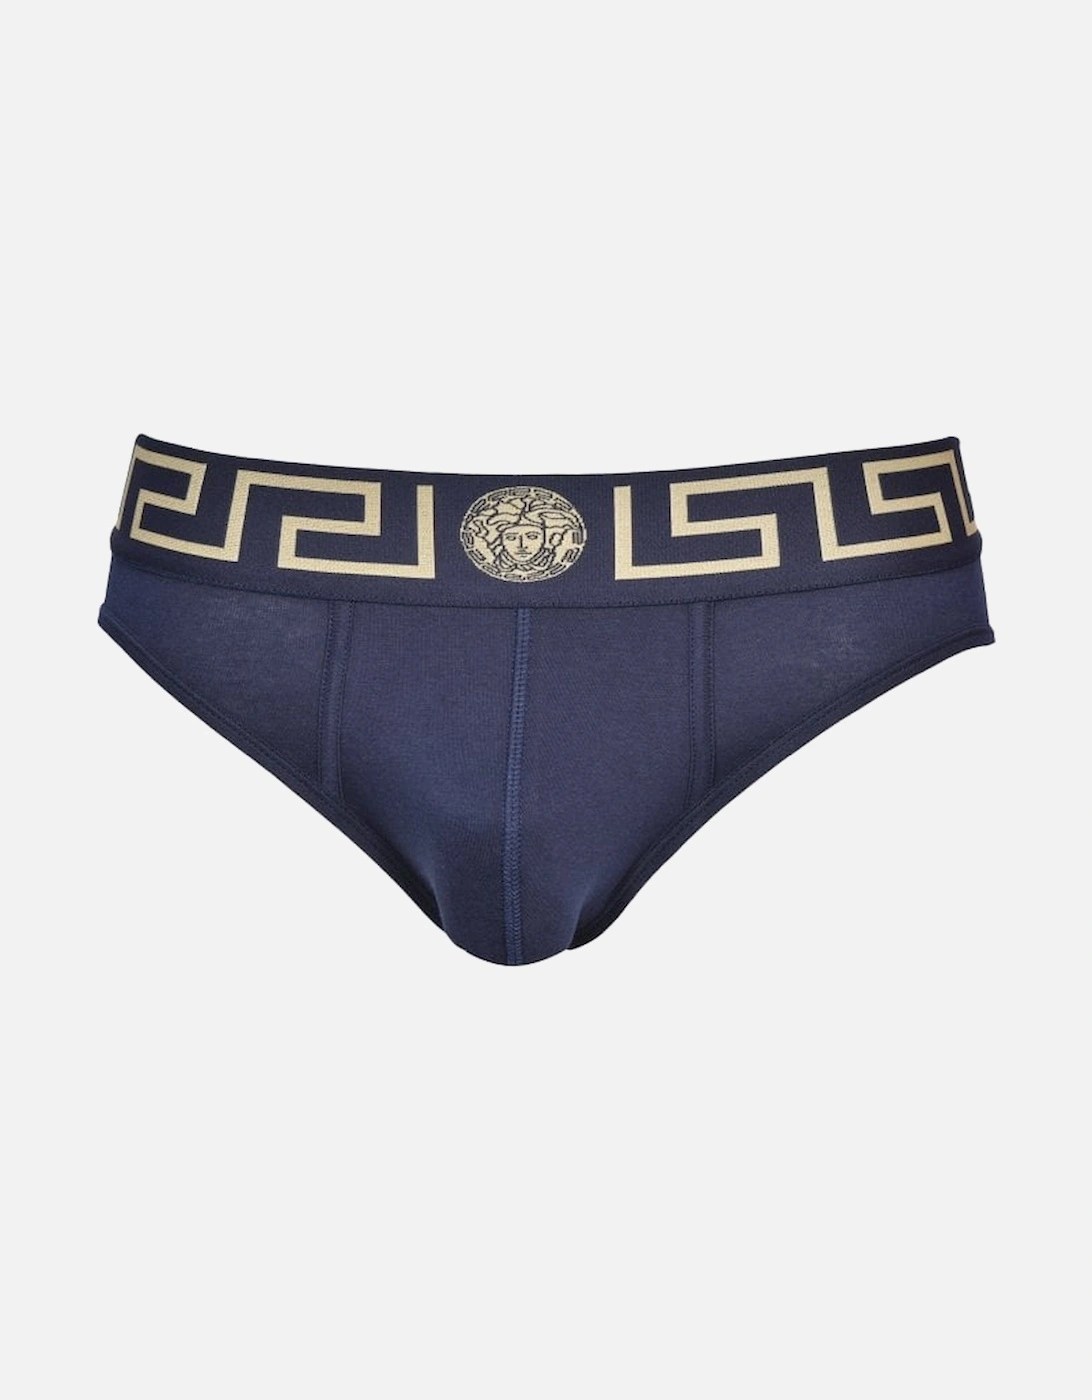 Iconic Greca Low-Rise Brief, Blue/gold, 6 of 5